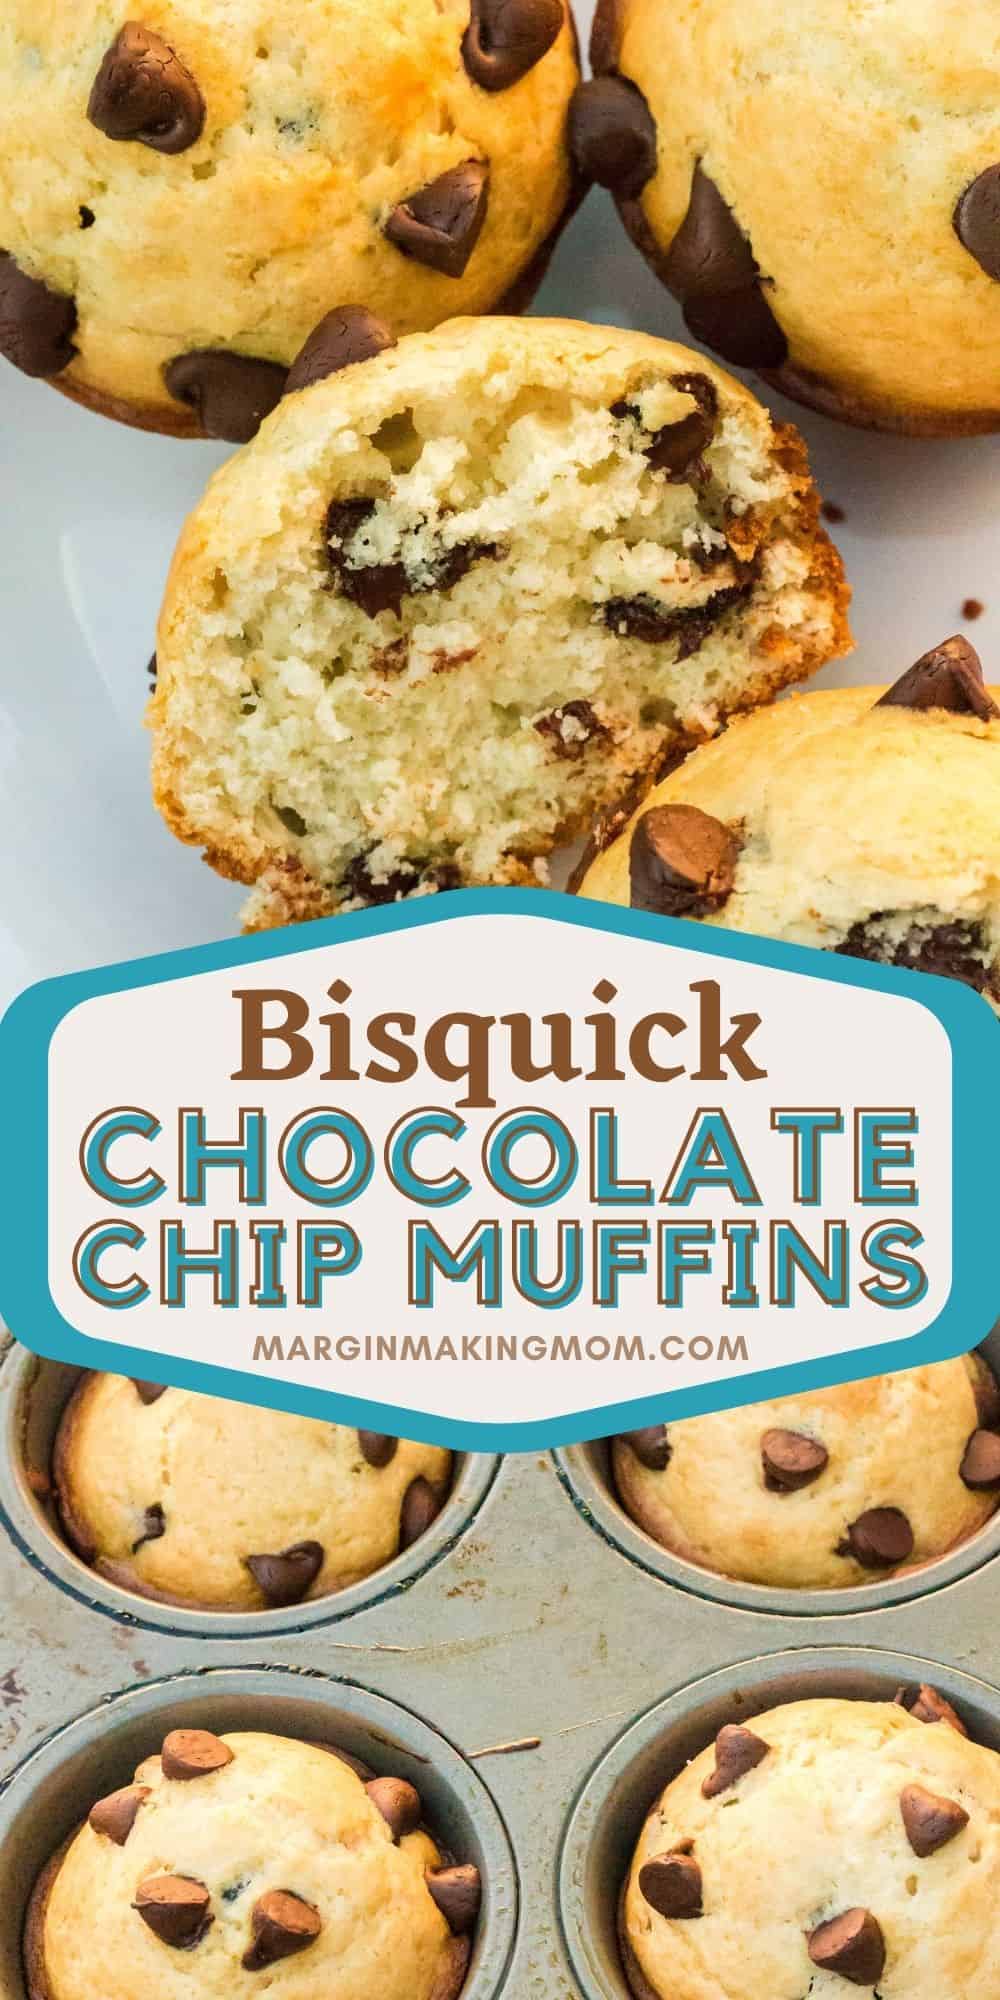 collage image featuring two photos. One photo shows bisquick chocolate chip muffins on a white plate, with one muffin cut in half. The other photo shows muffins still in the muffin pan.